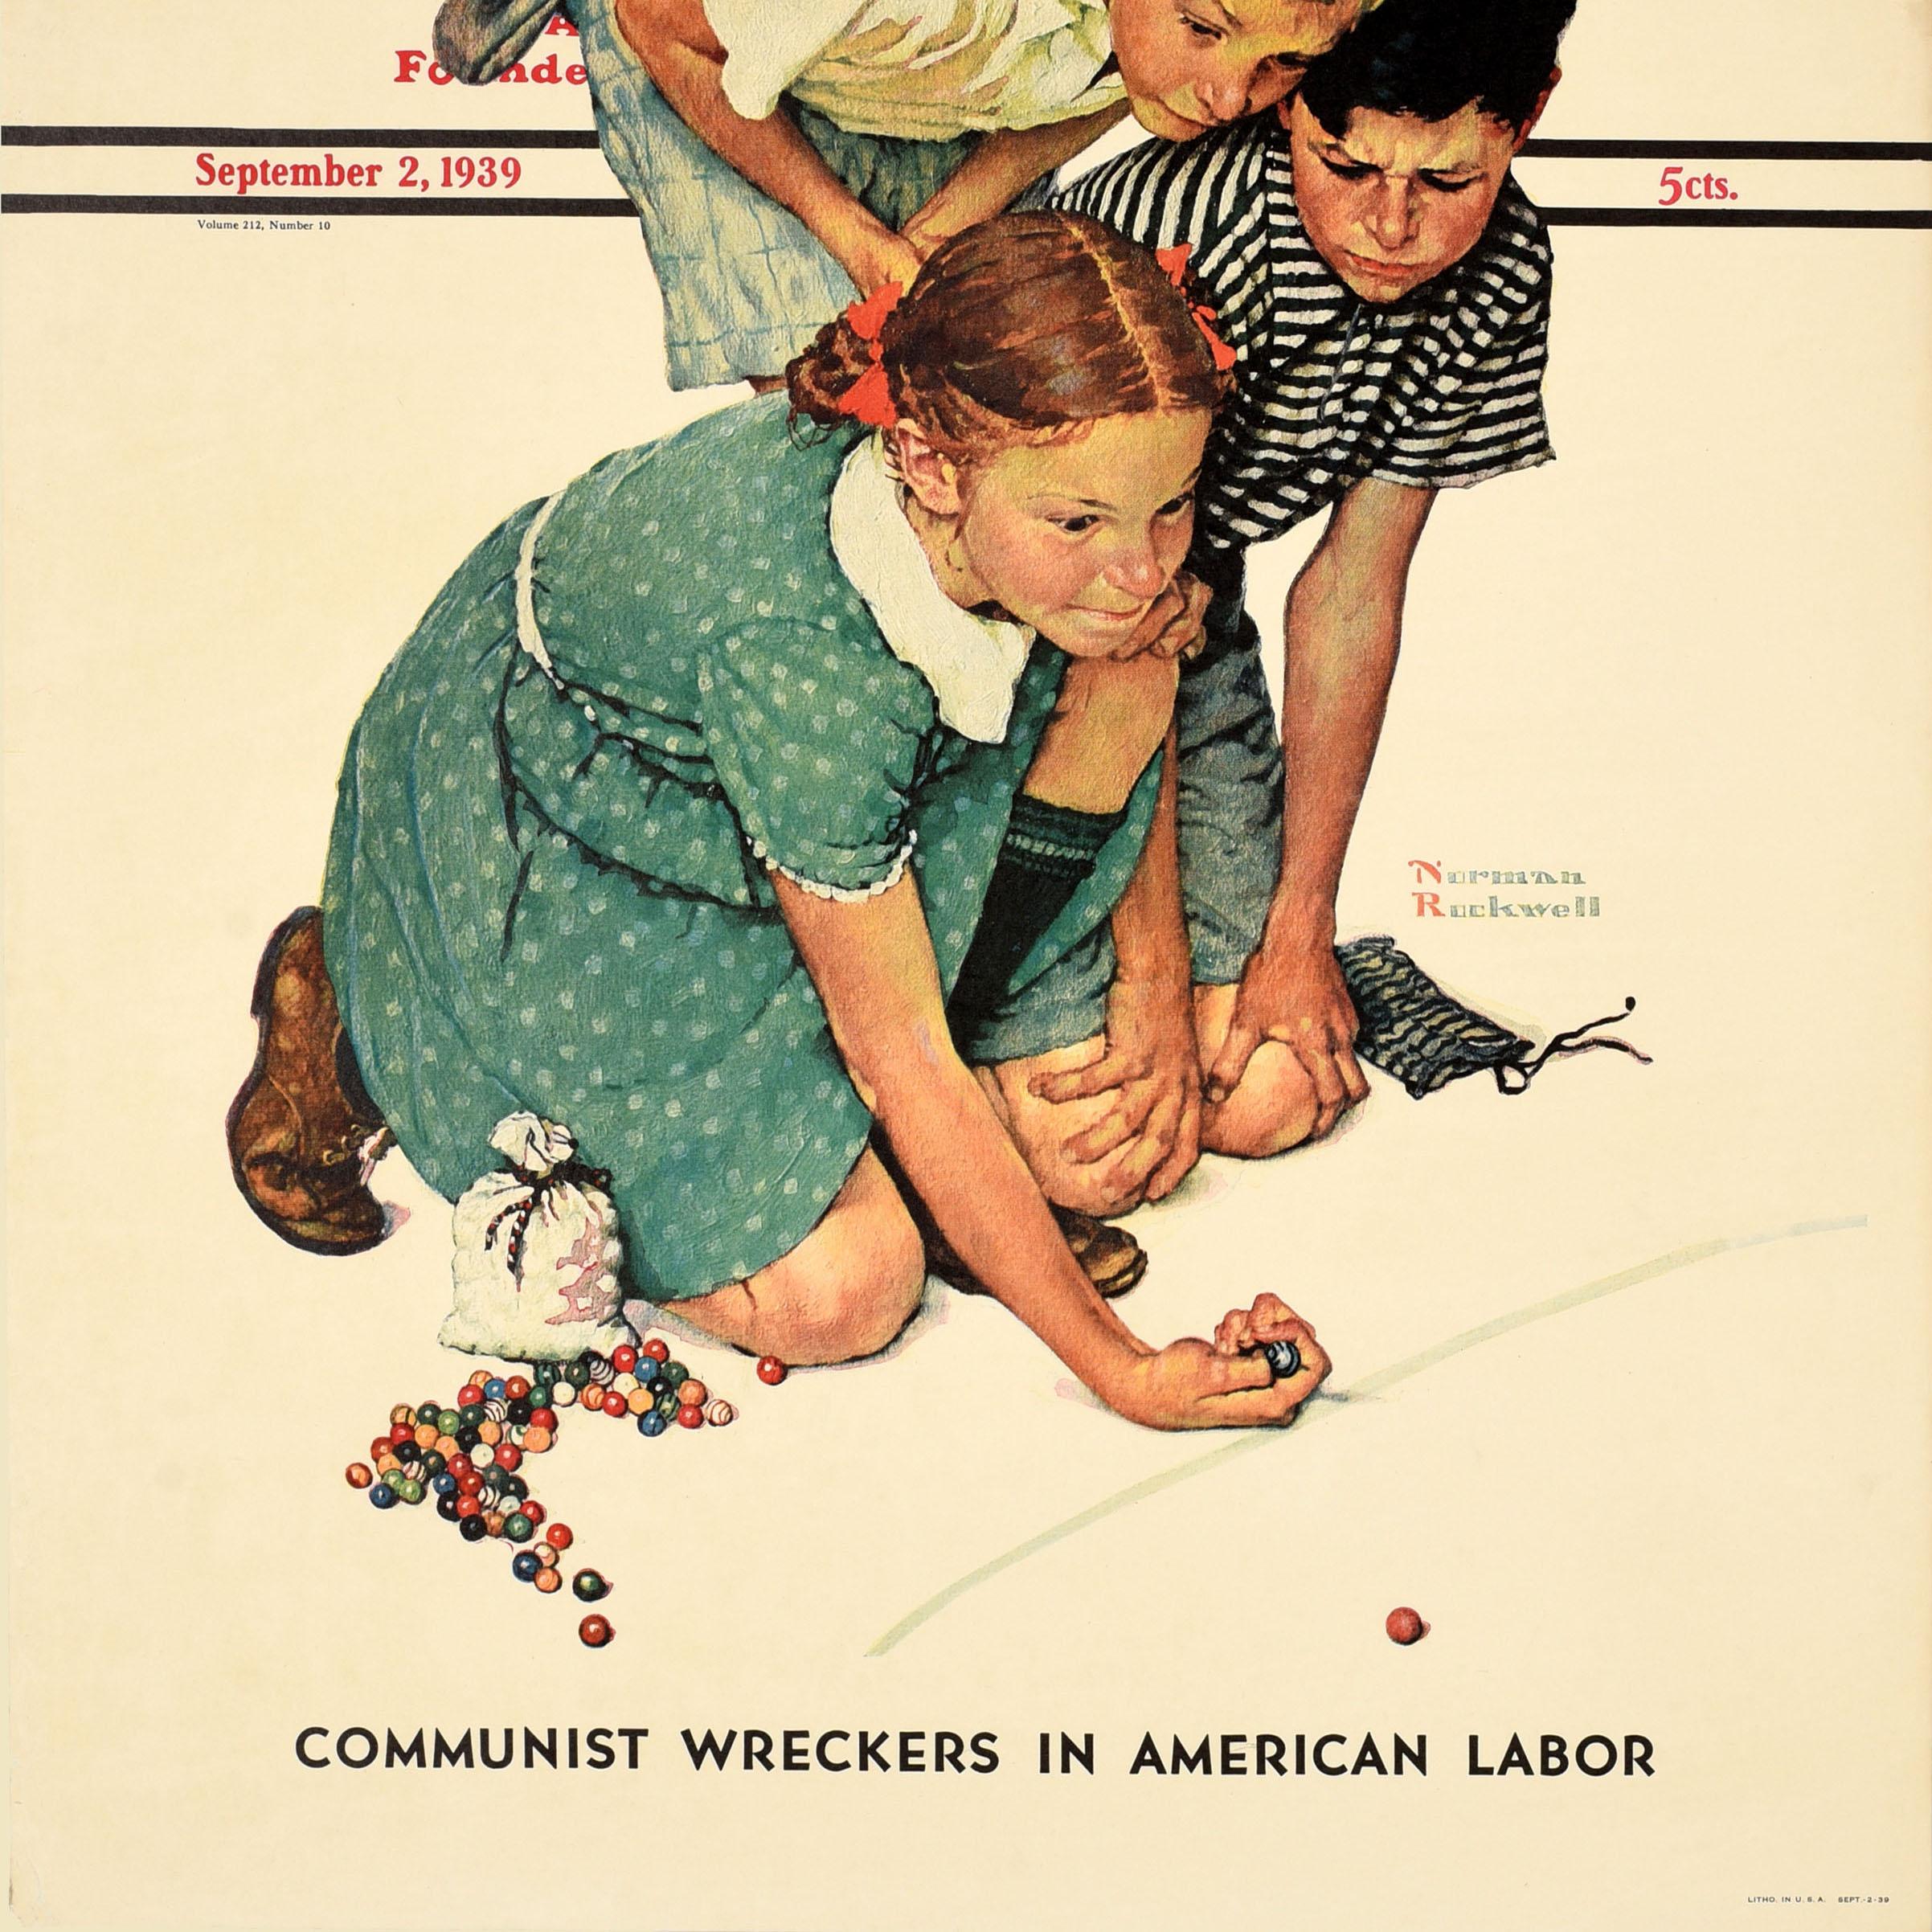 Original vintage advertising poster for The Saturday Evening Post illustrated magazine issued on 2 September 1939 featuring artwork by the notable American painter and cover designer Norman Percevel Rockwell (1894-1978) depicting three children